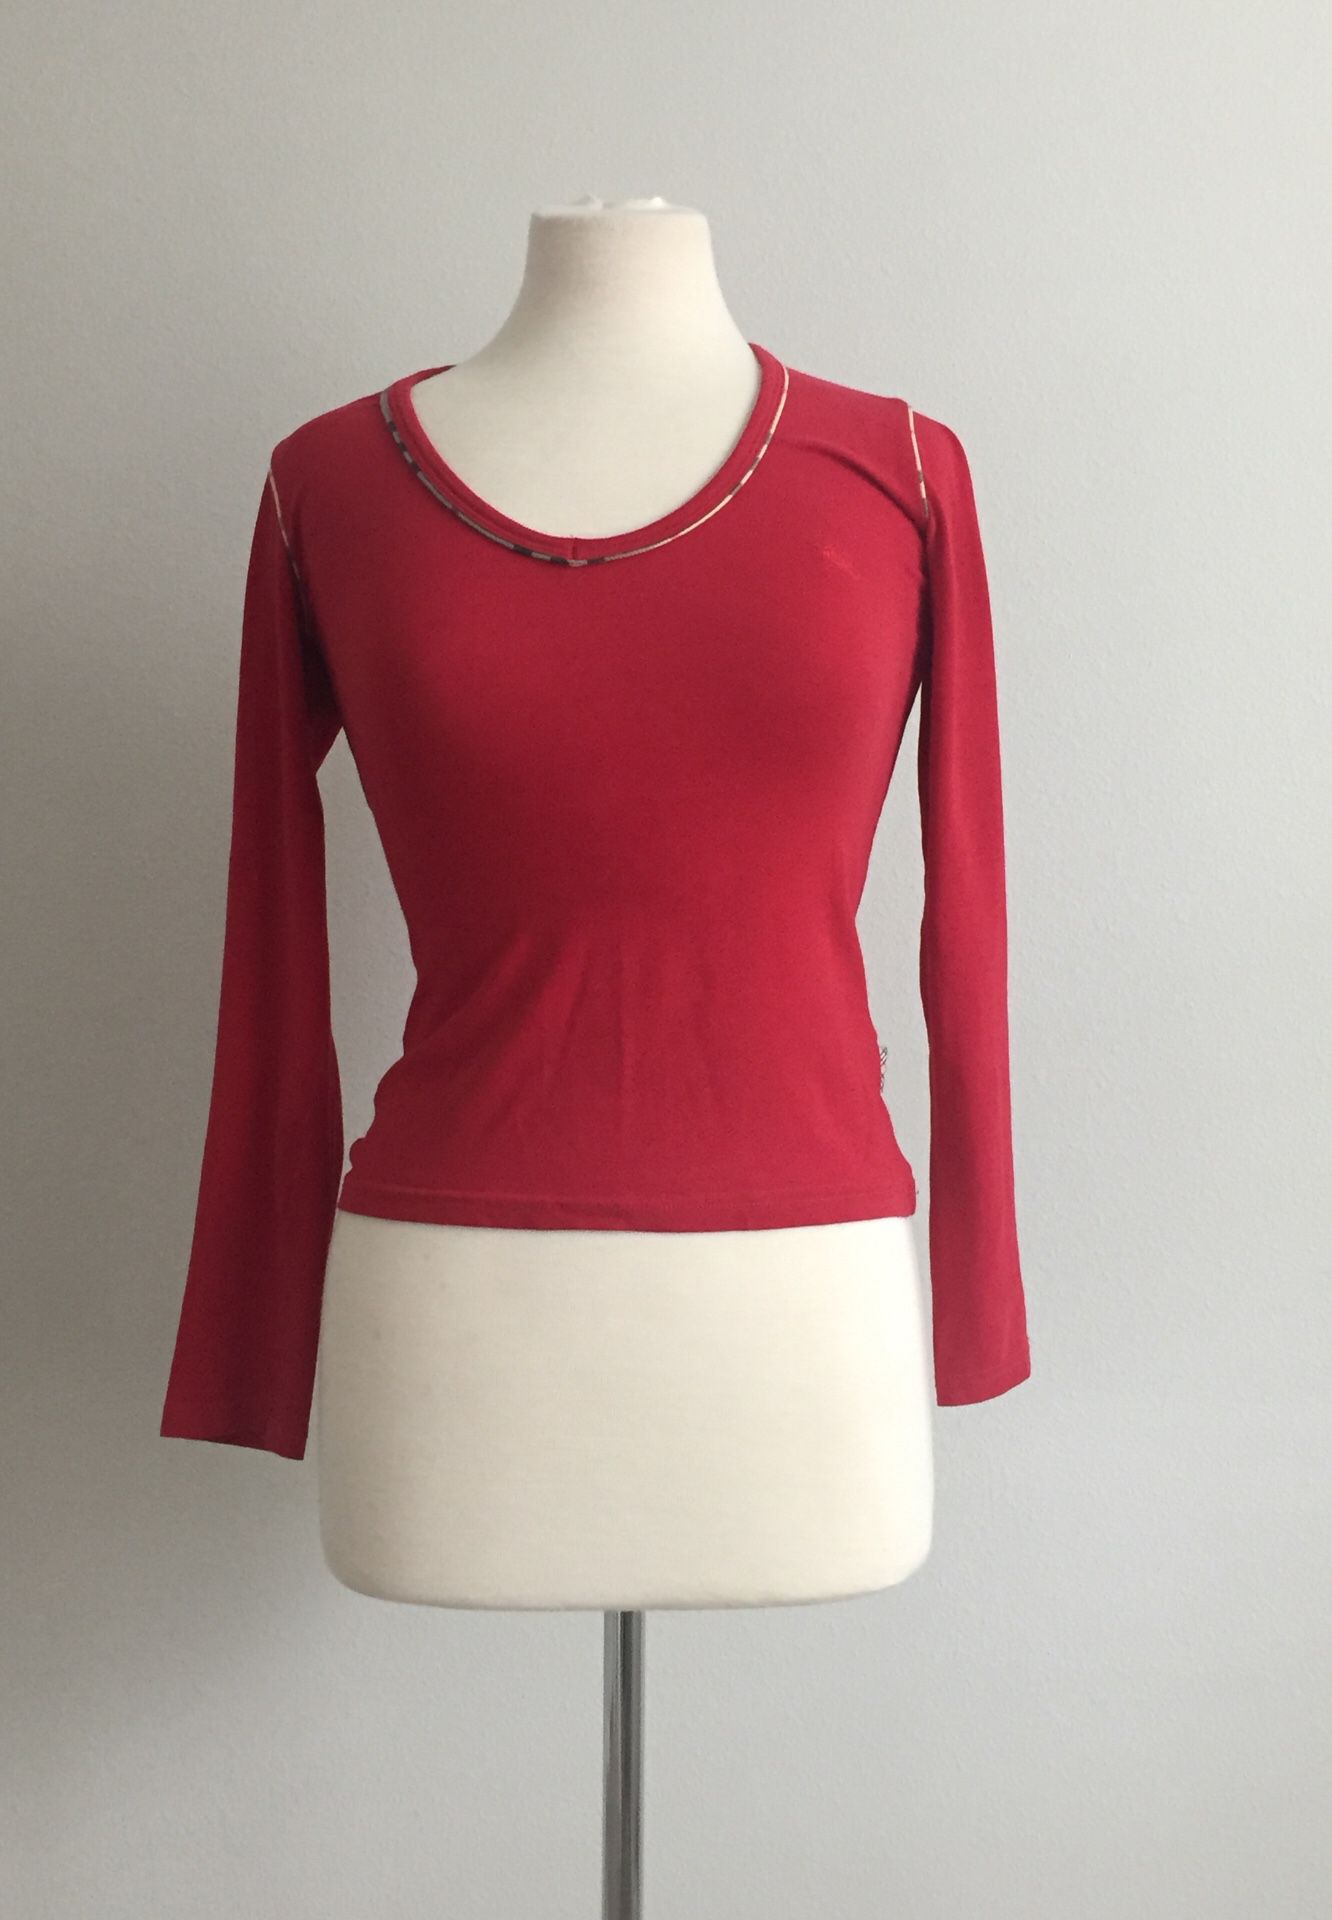 Burberry top long sleeve blouse size XS/S